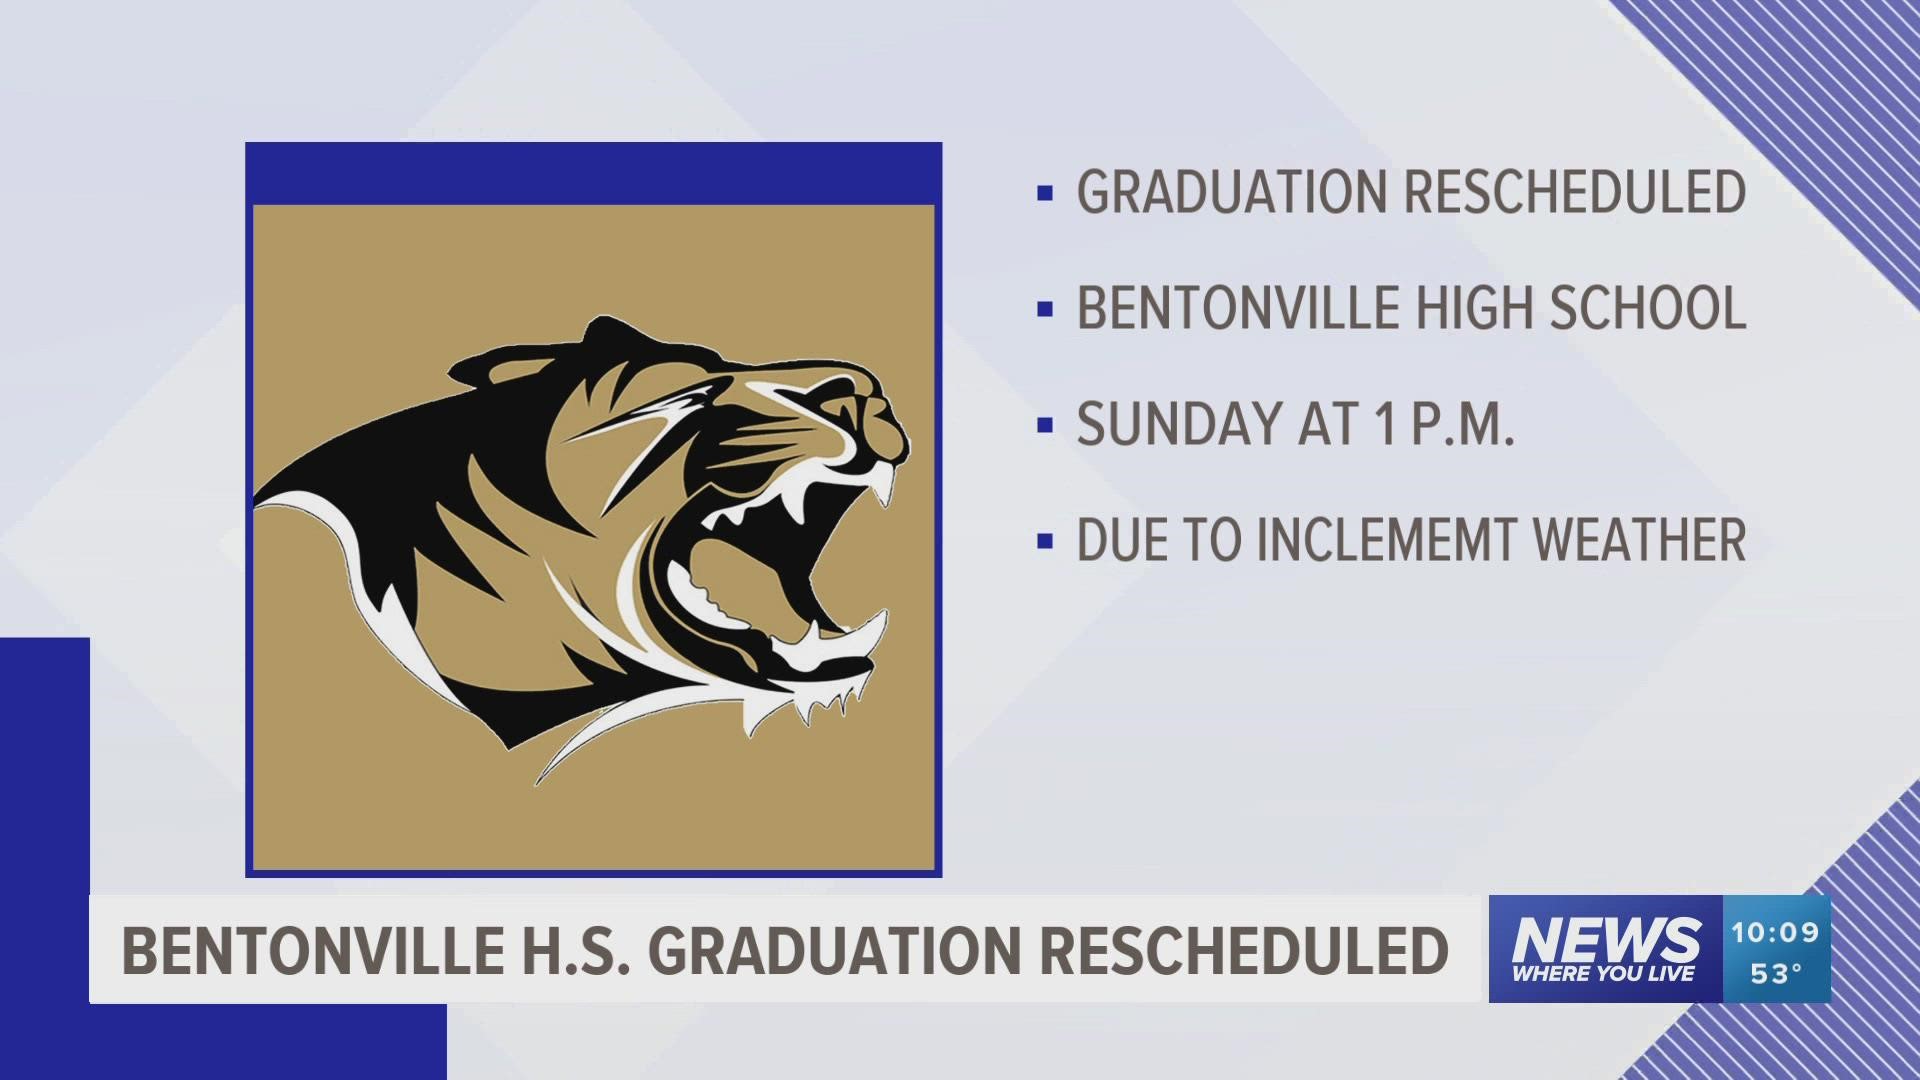 The graduation ceremony for Bentonville High School is rescheduled for Sunday, May 22, at 1 p.m.